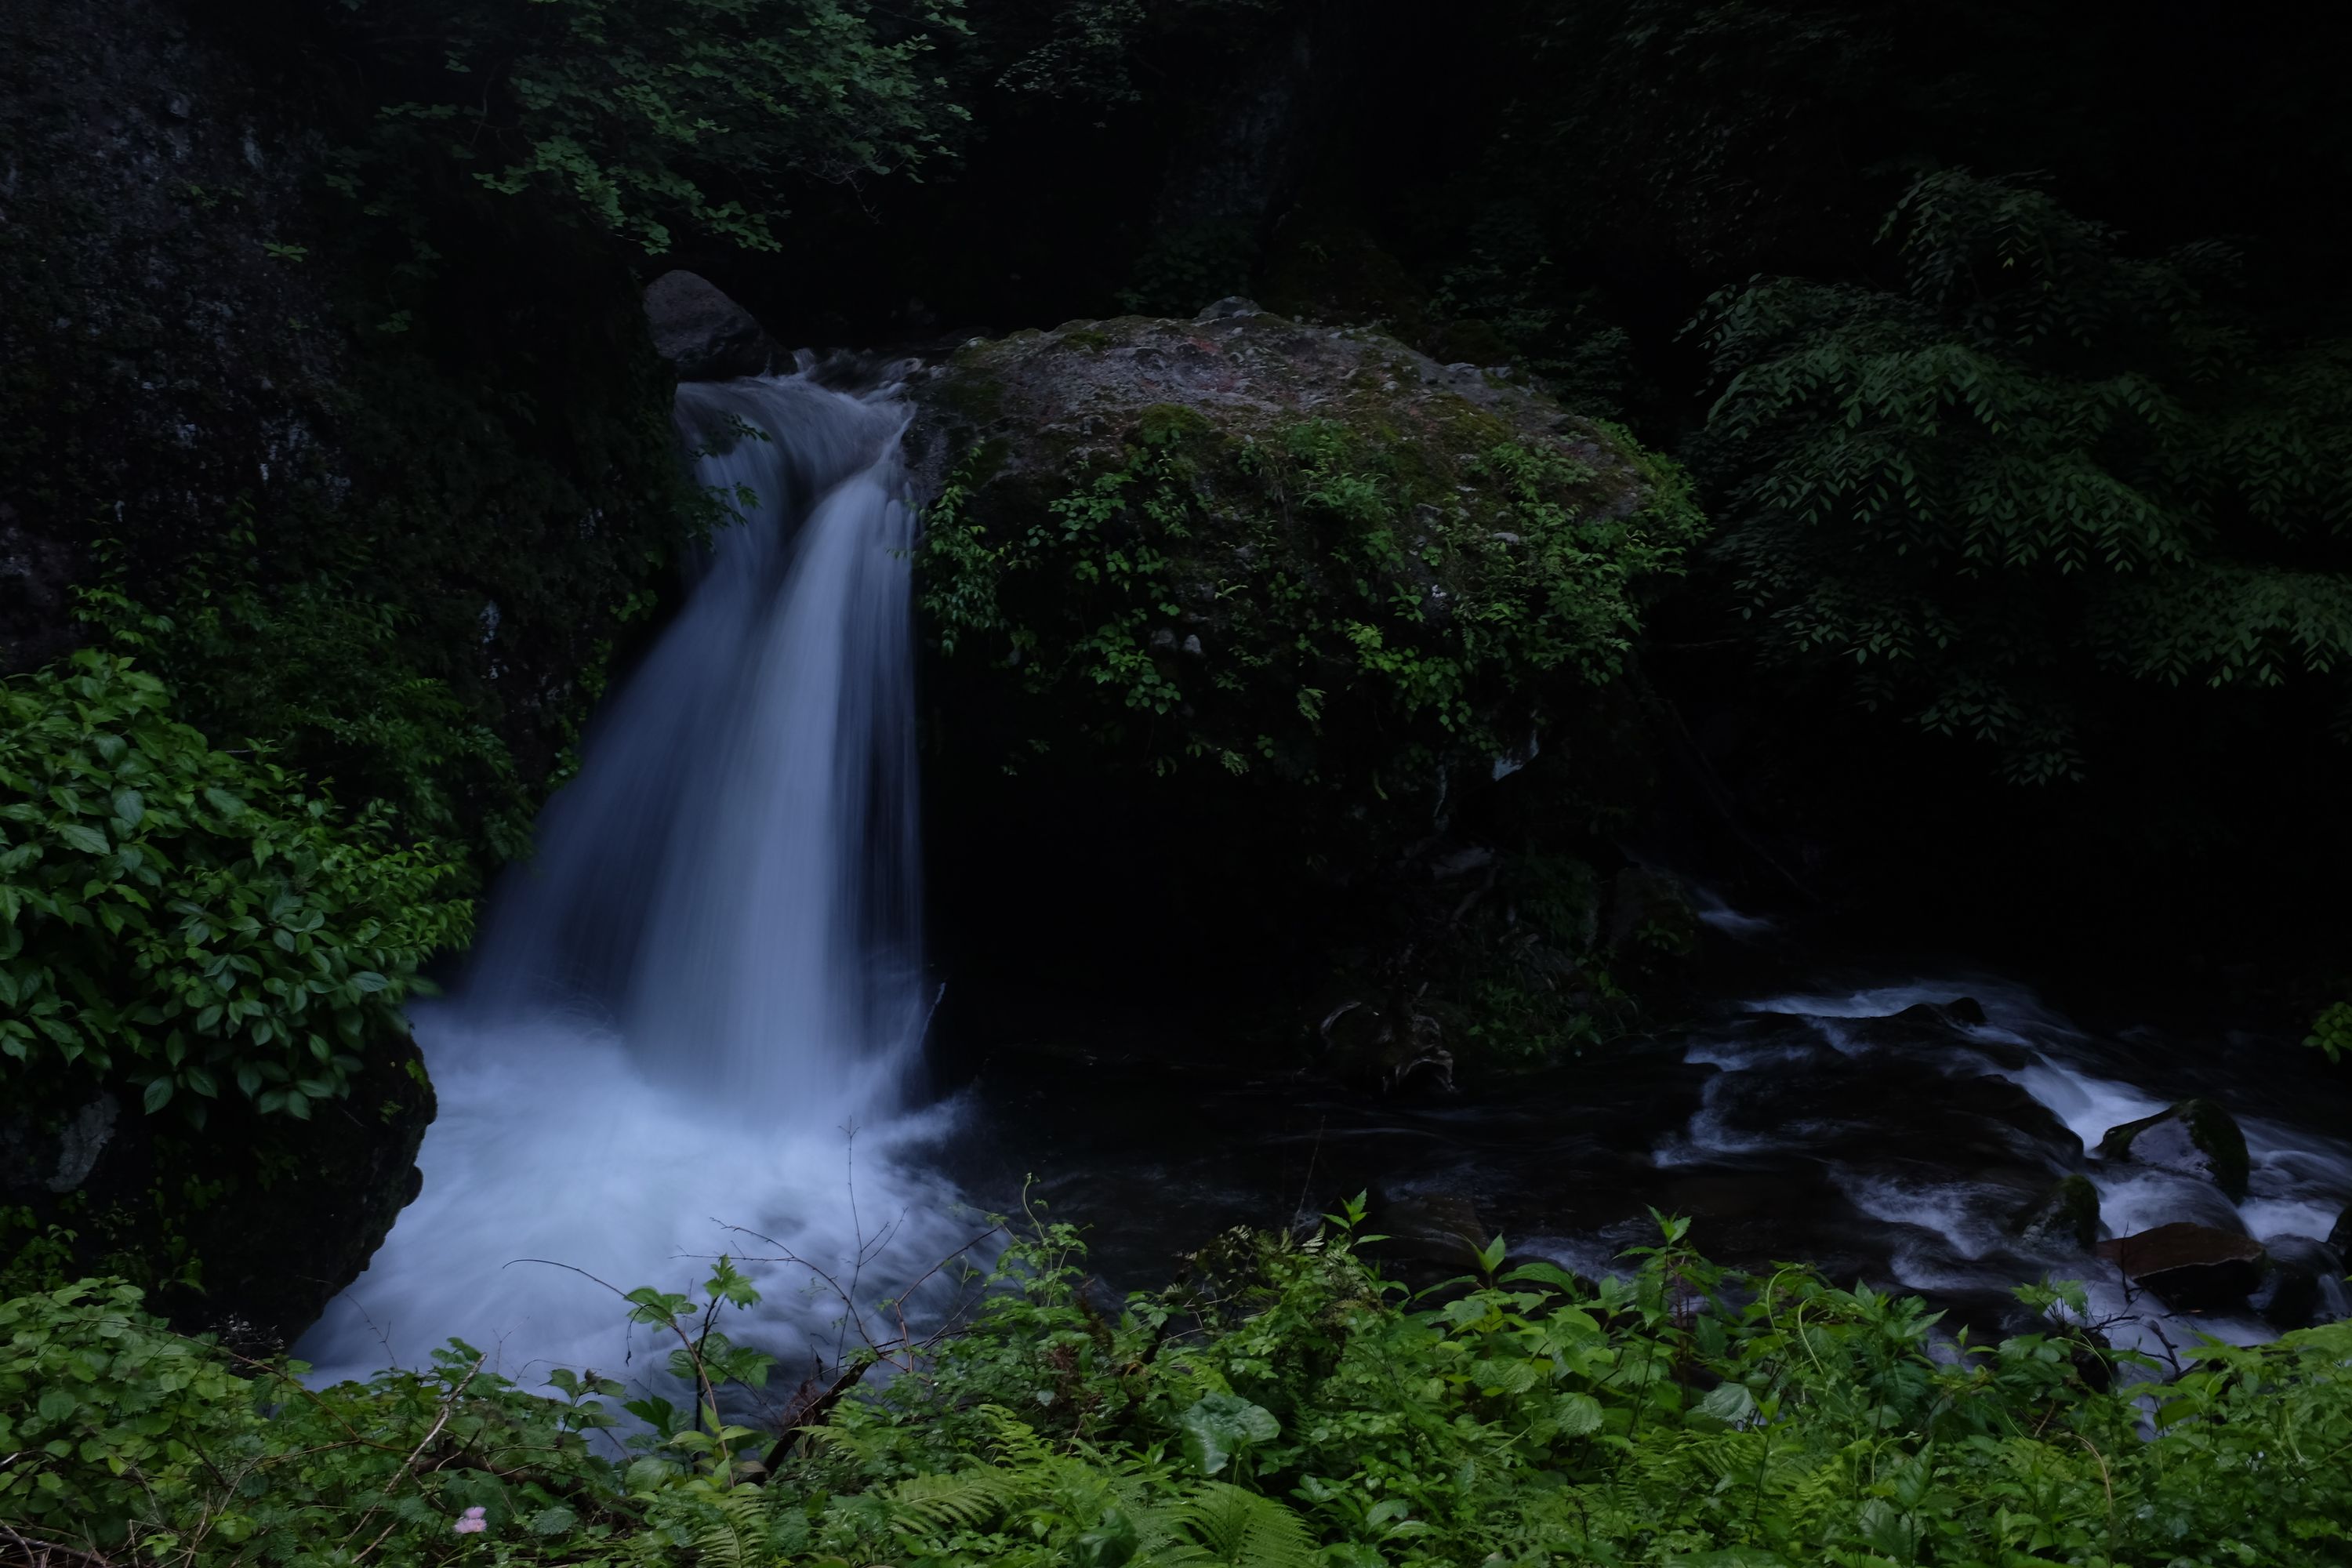 A small waterfall in a stream in a verdant forest.